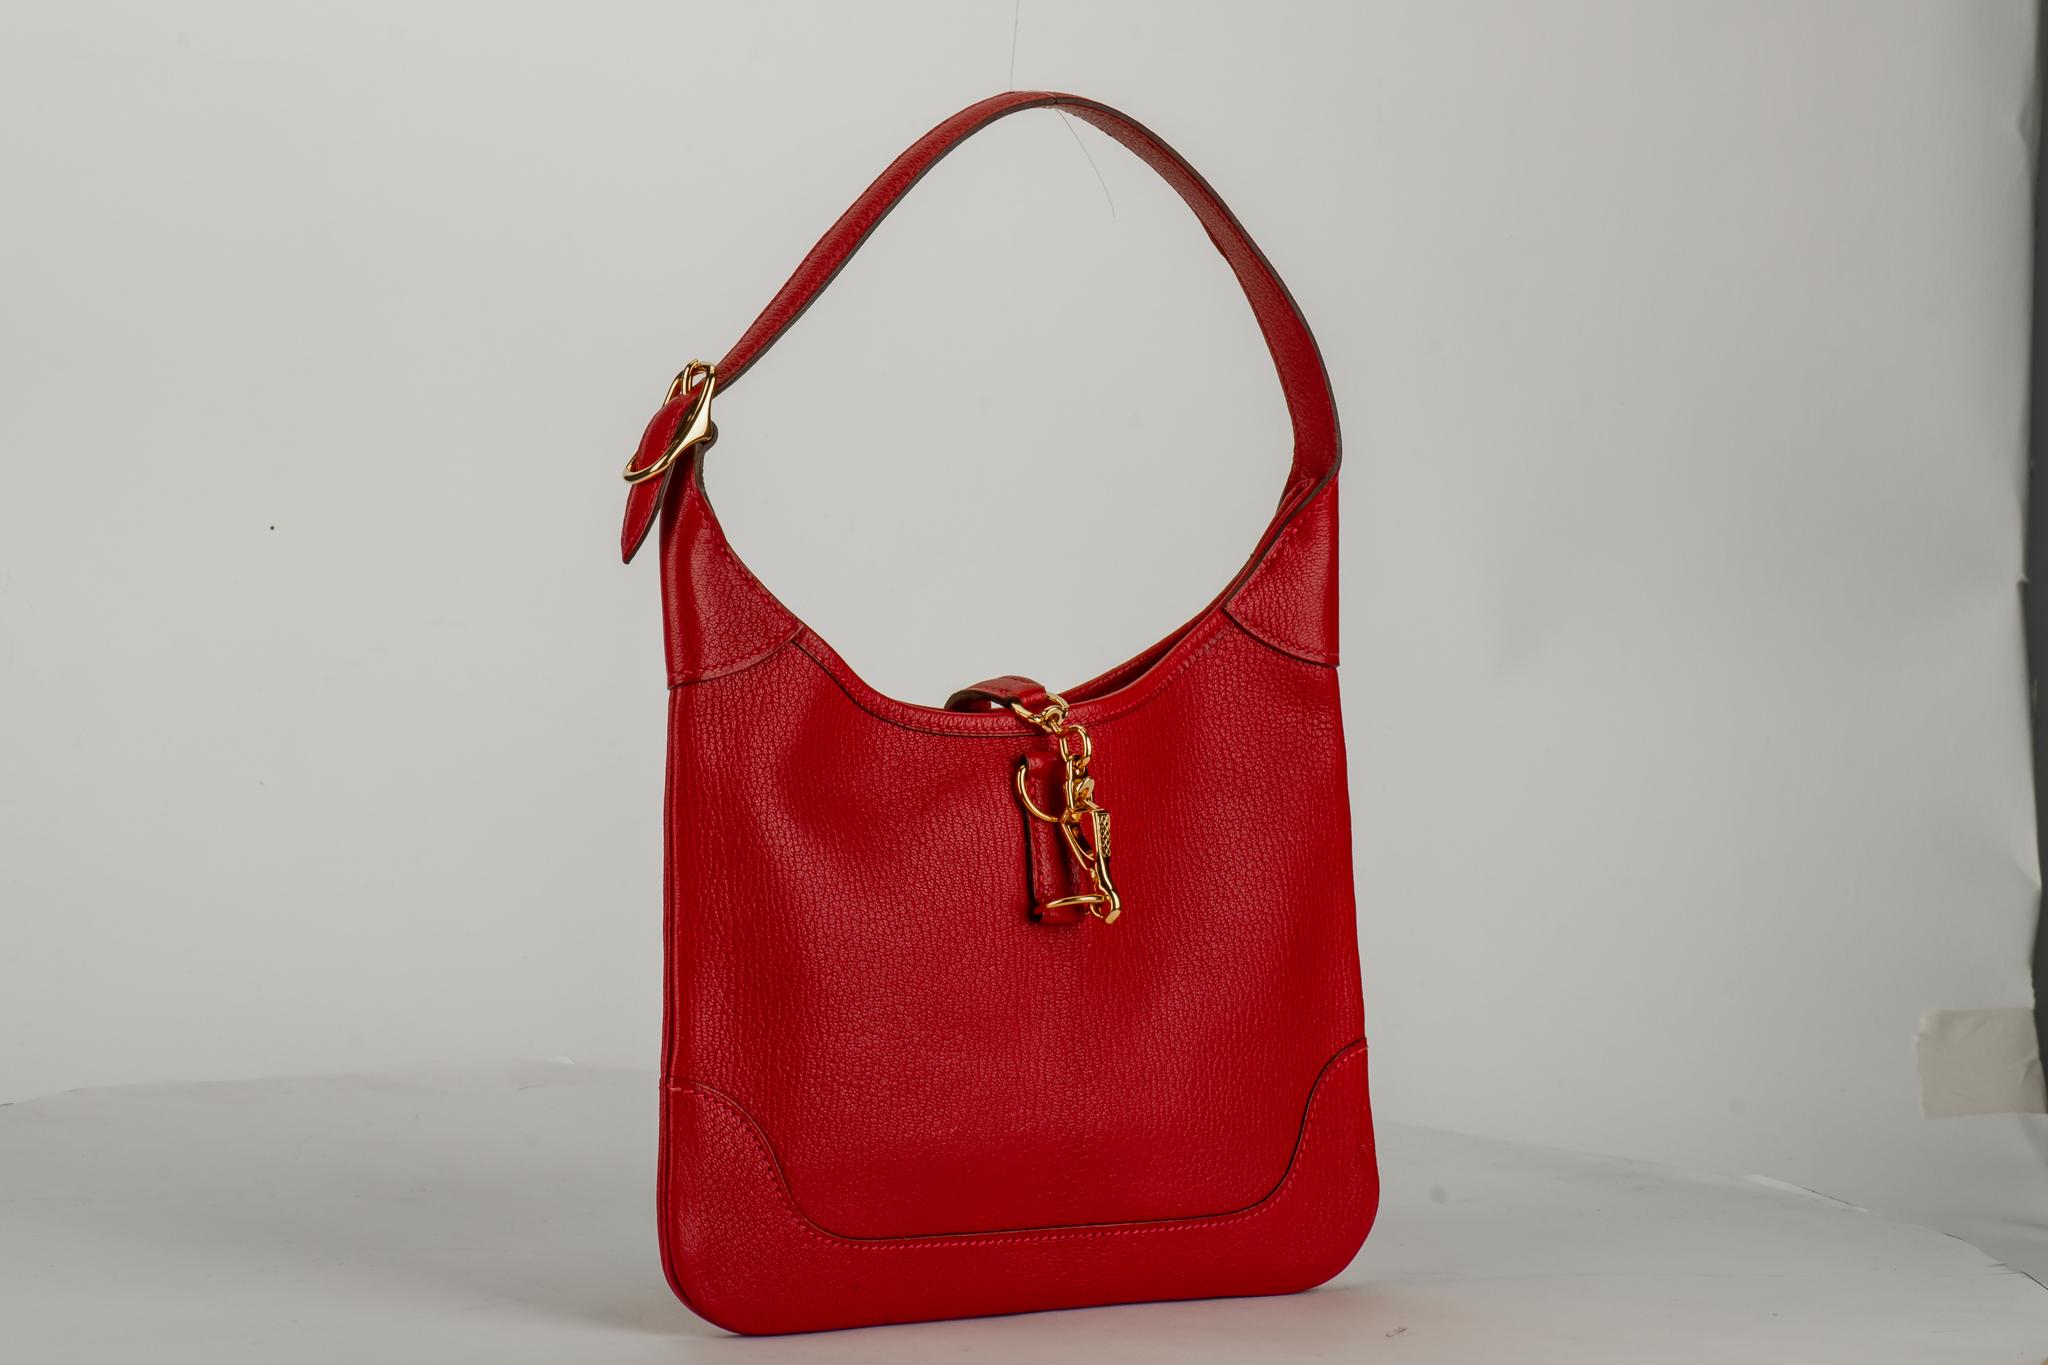 Hermes red chevre mini trim shoulder bag with gold tone hardware. Excellent condition. Date stamp H for 2004.